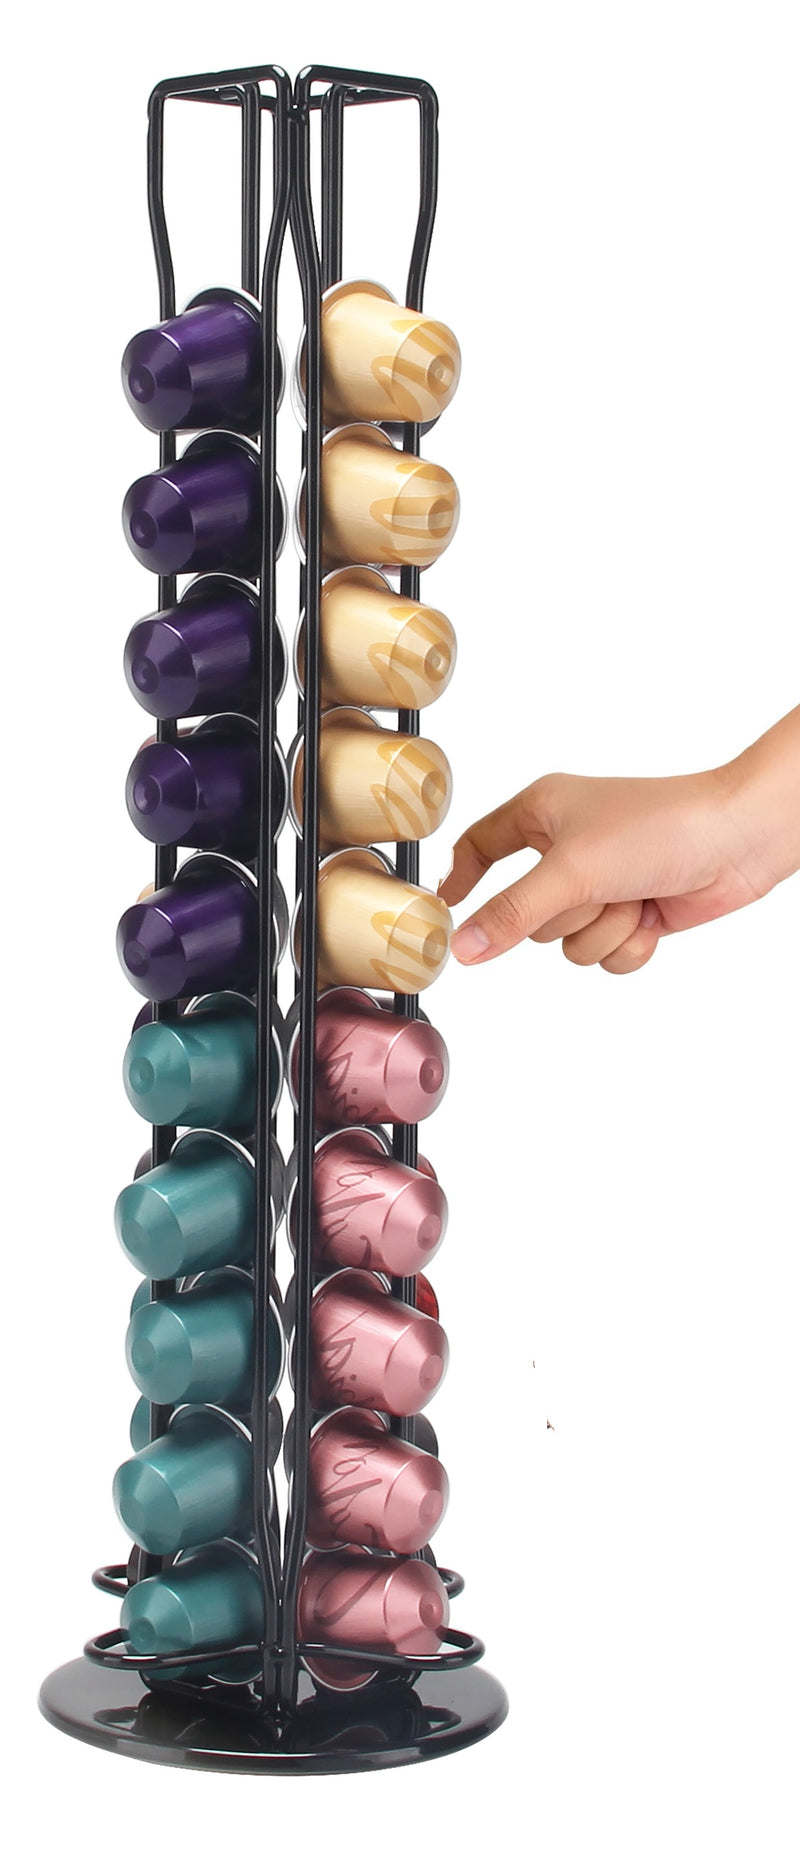 Clever - Nespresso Capsule Holder - 360° rotatable - 40 Cups - Cup Holder - Coffee Cup Holder - Black